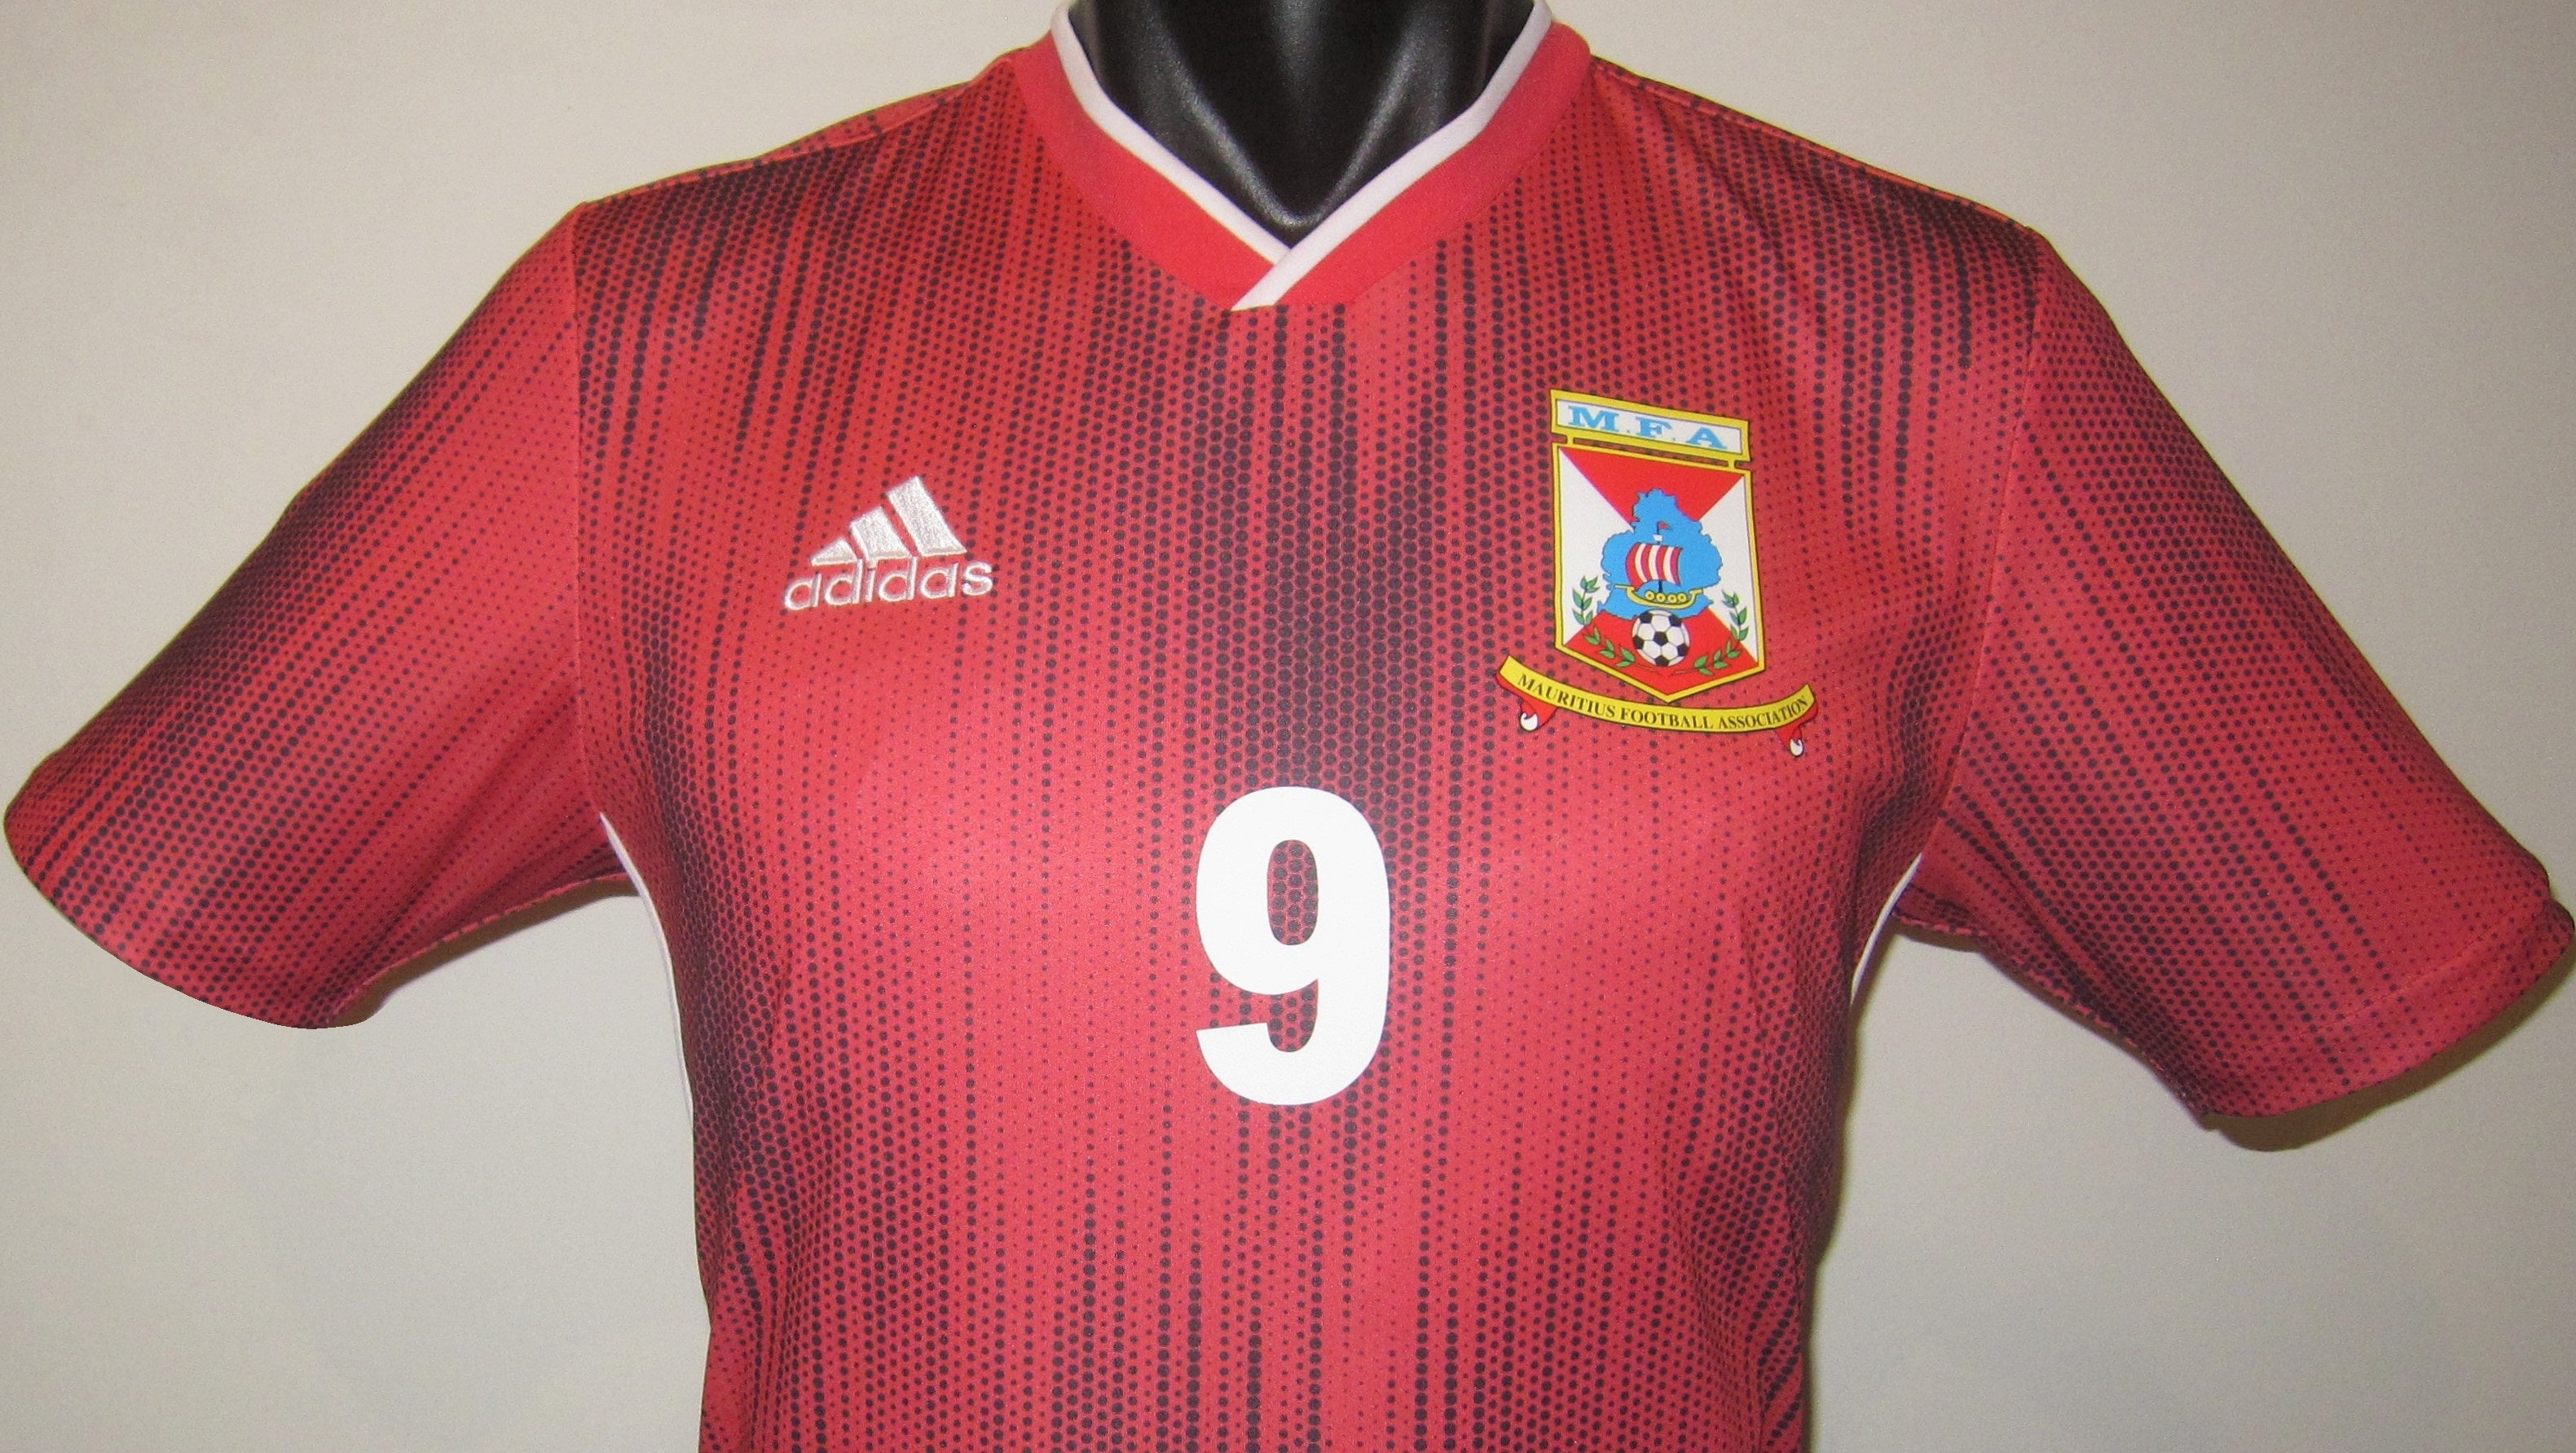 Mauritius 2021 Home (#9- SOPHIE) Jersey/Shirt